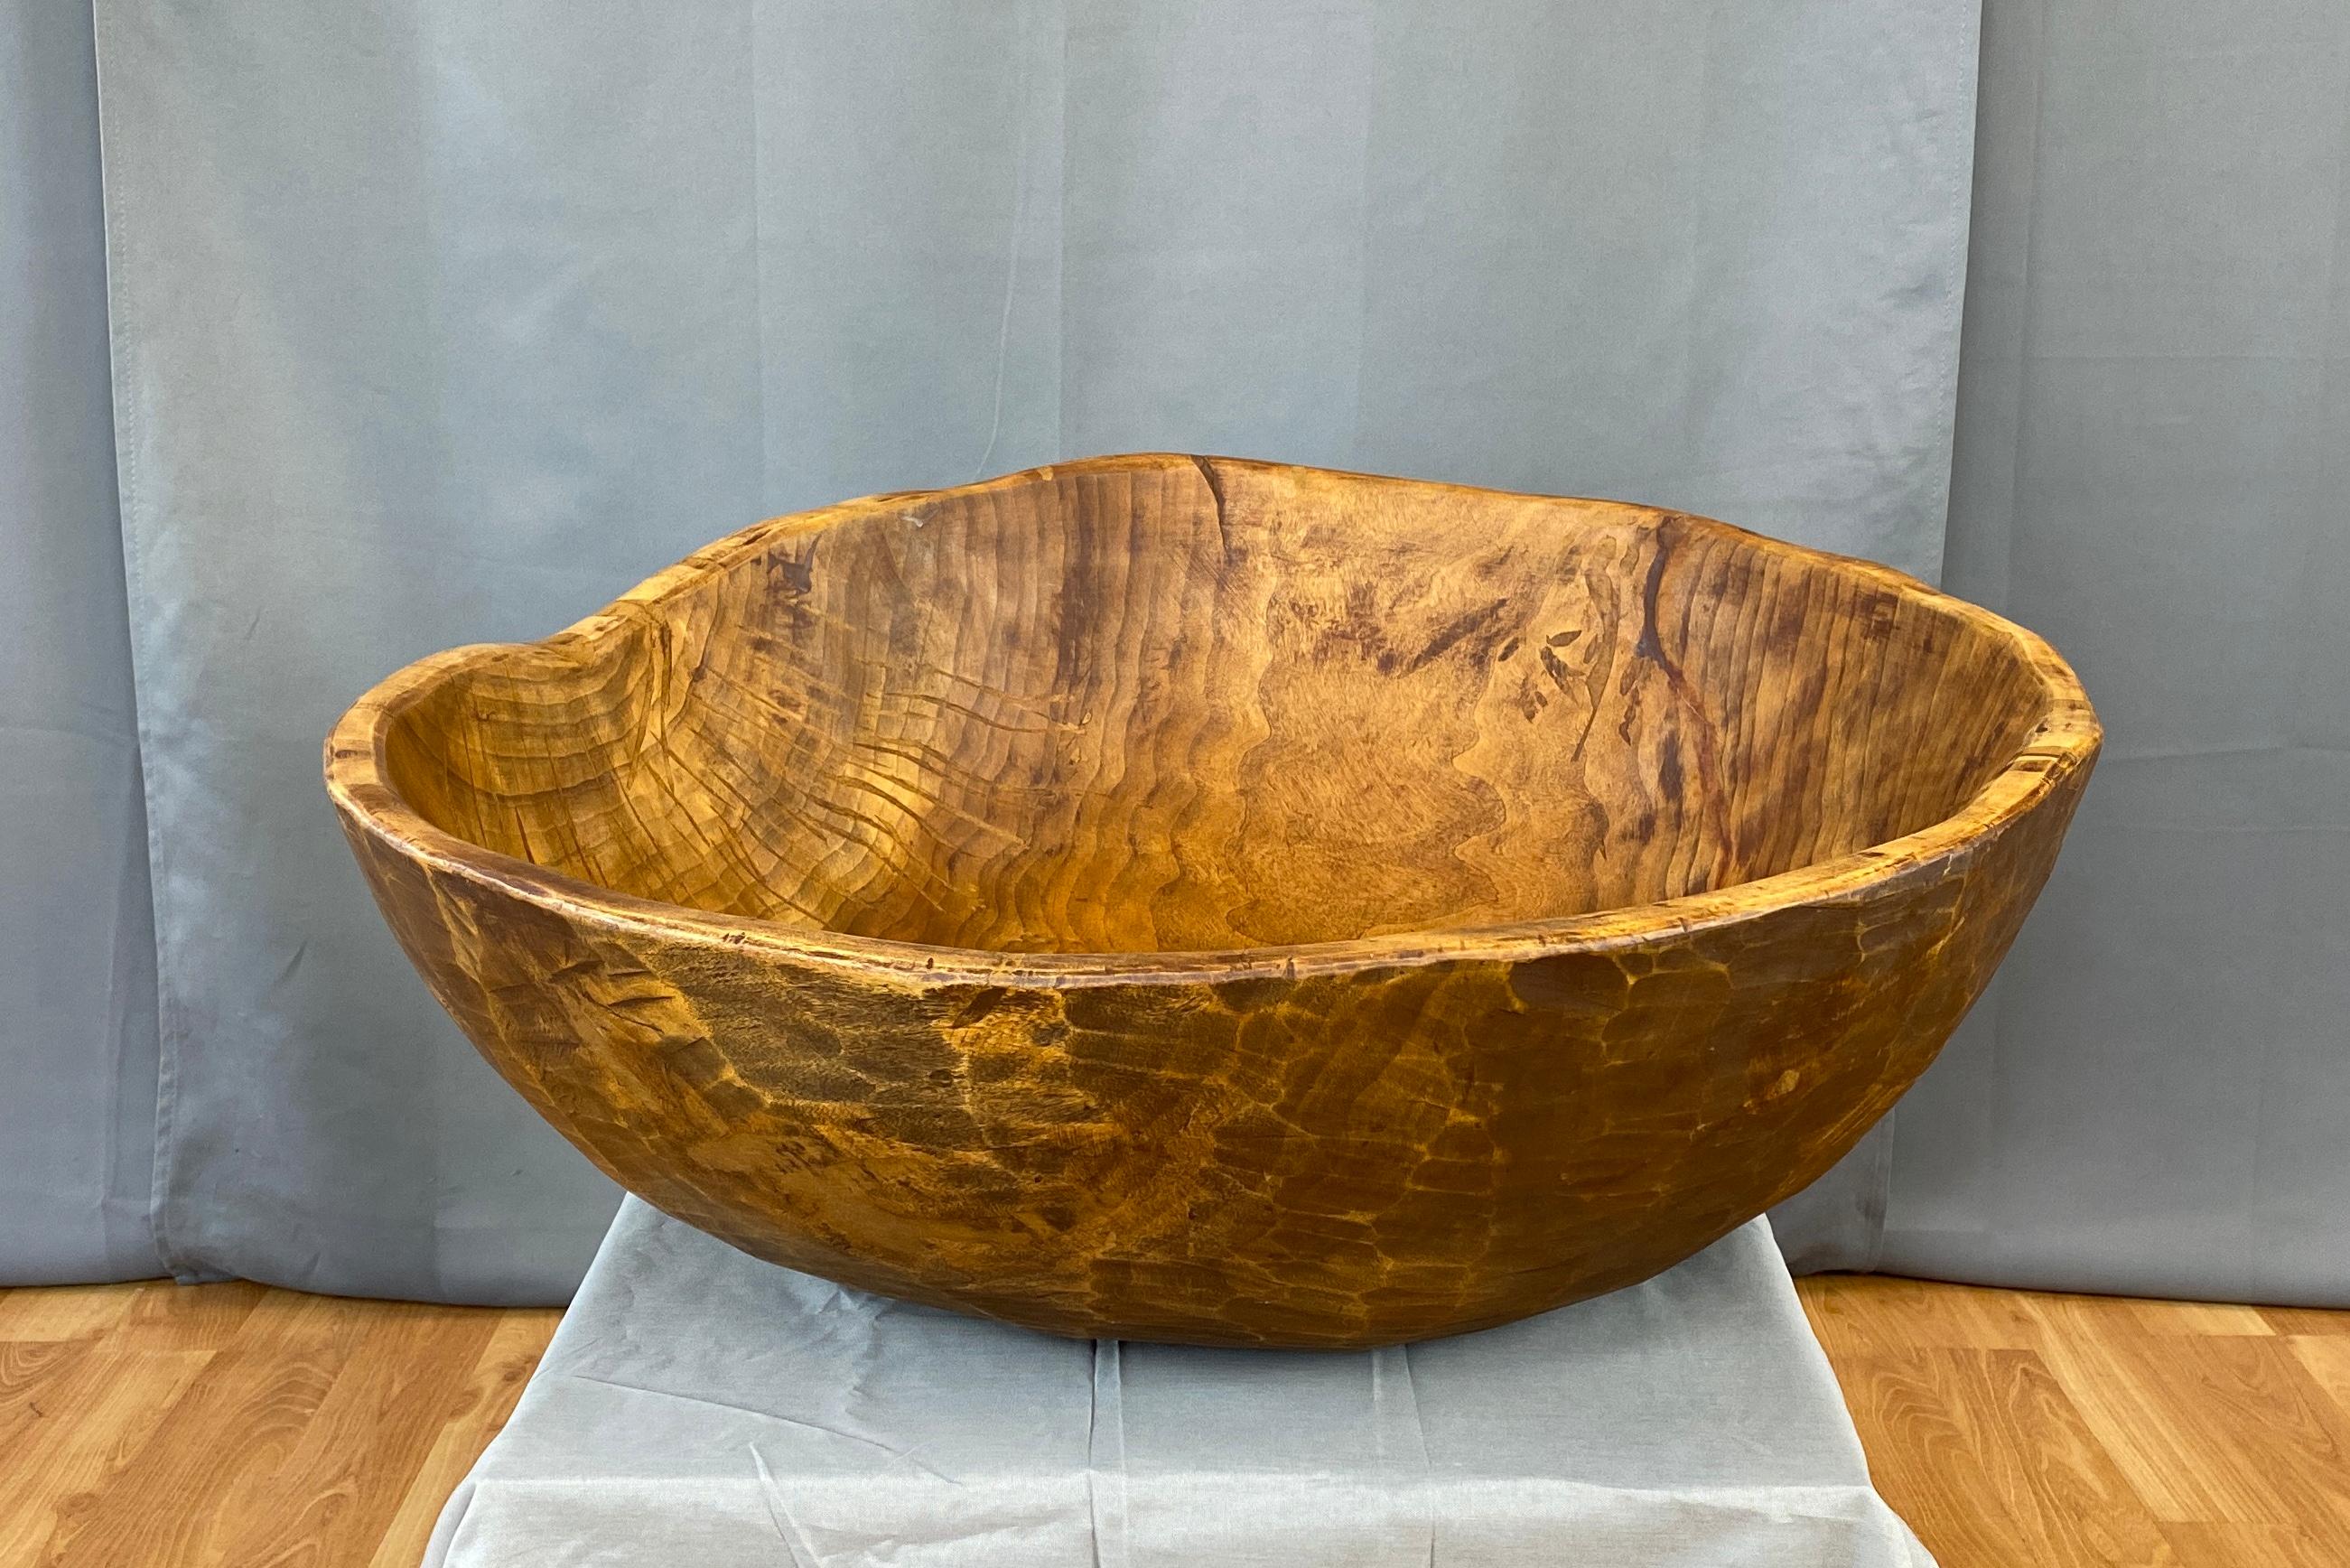 Offered here is an extra large late 20th Century hand carved wooden bowl.
This uncommon size would have taken the craftsperson many weeks, with great care, carving this one piece of wood.
Not sure of the type of wood, but it has beautiful patina